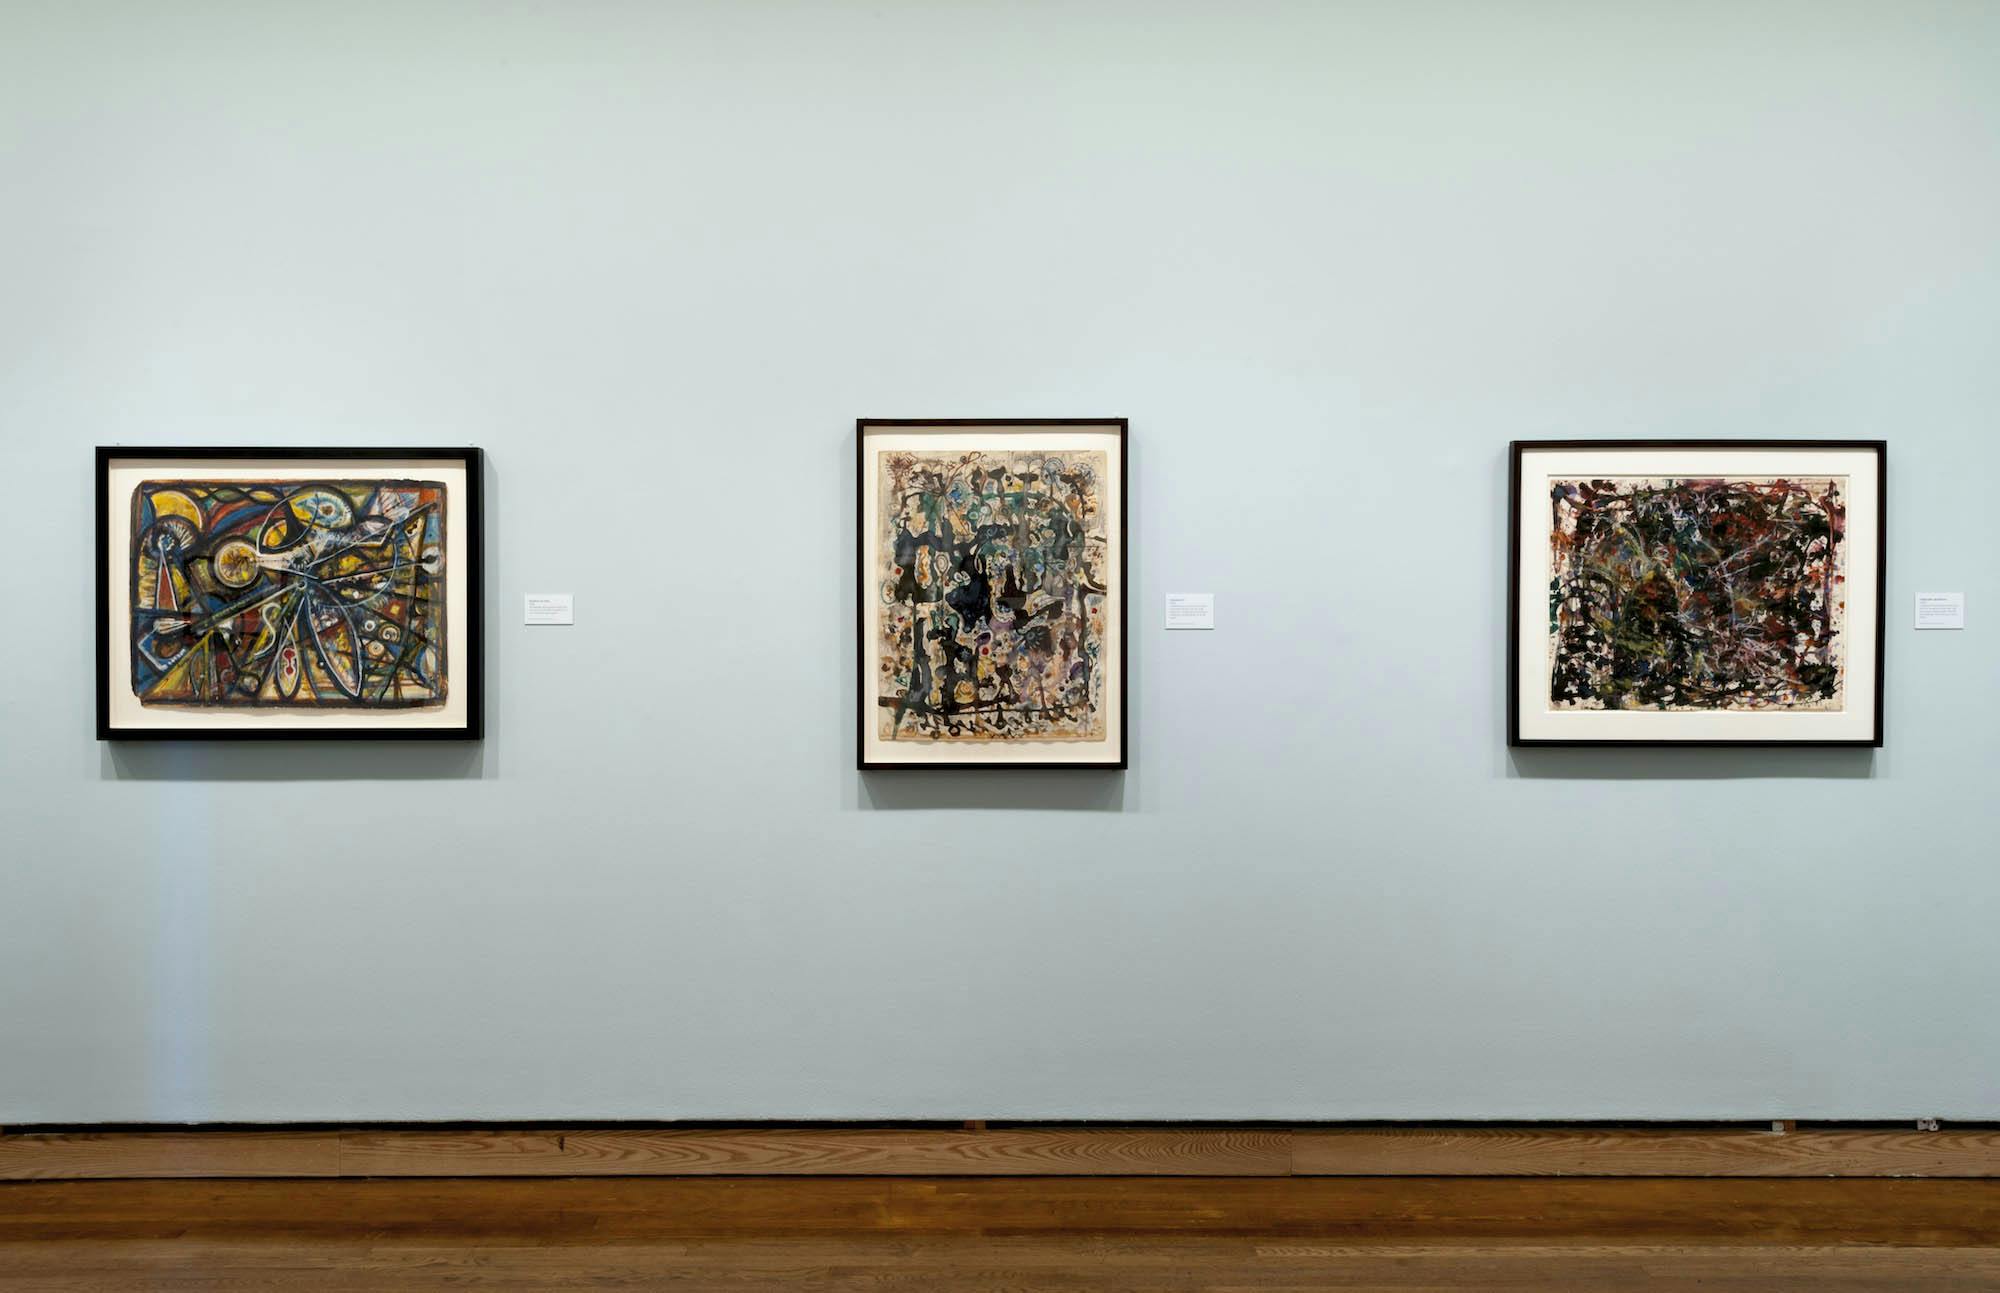 Installation view, Full Circle: Works on Paper by Richard Pousette-Dart, Philadelphia Museum of Art, Philadelphia, PA 2014. – The Richard Pousette-Dart Foundation